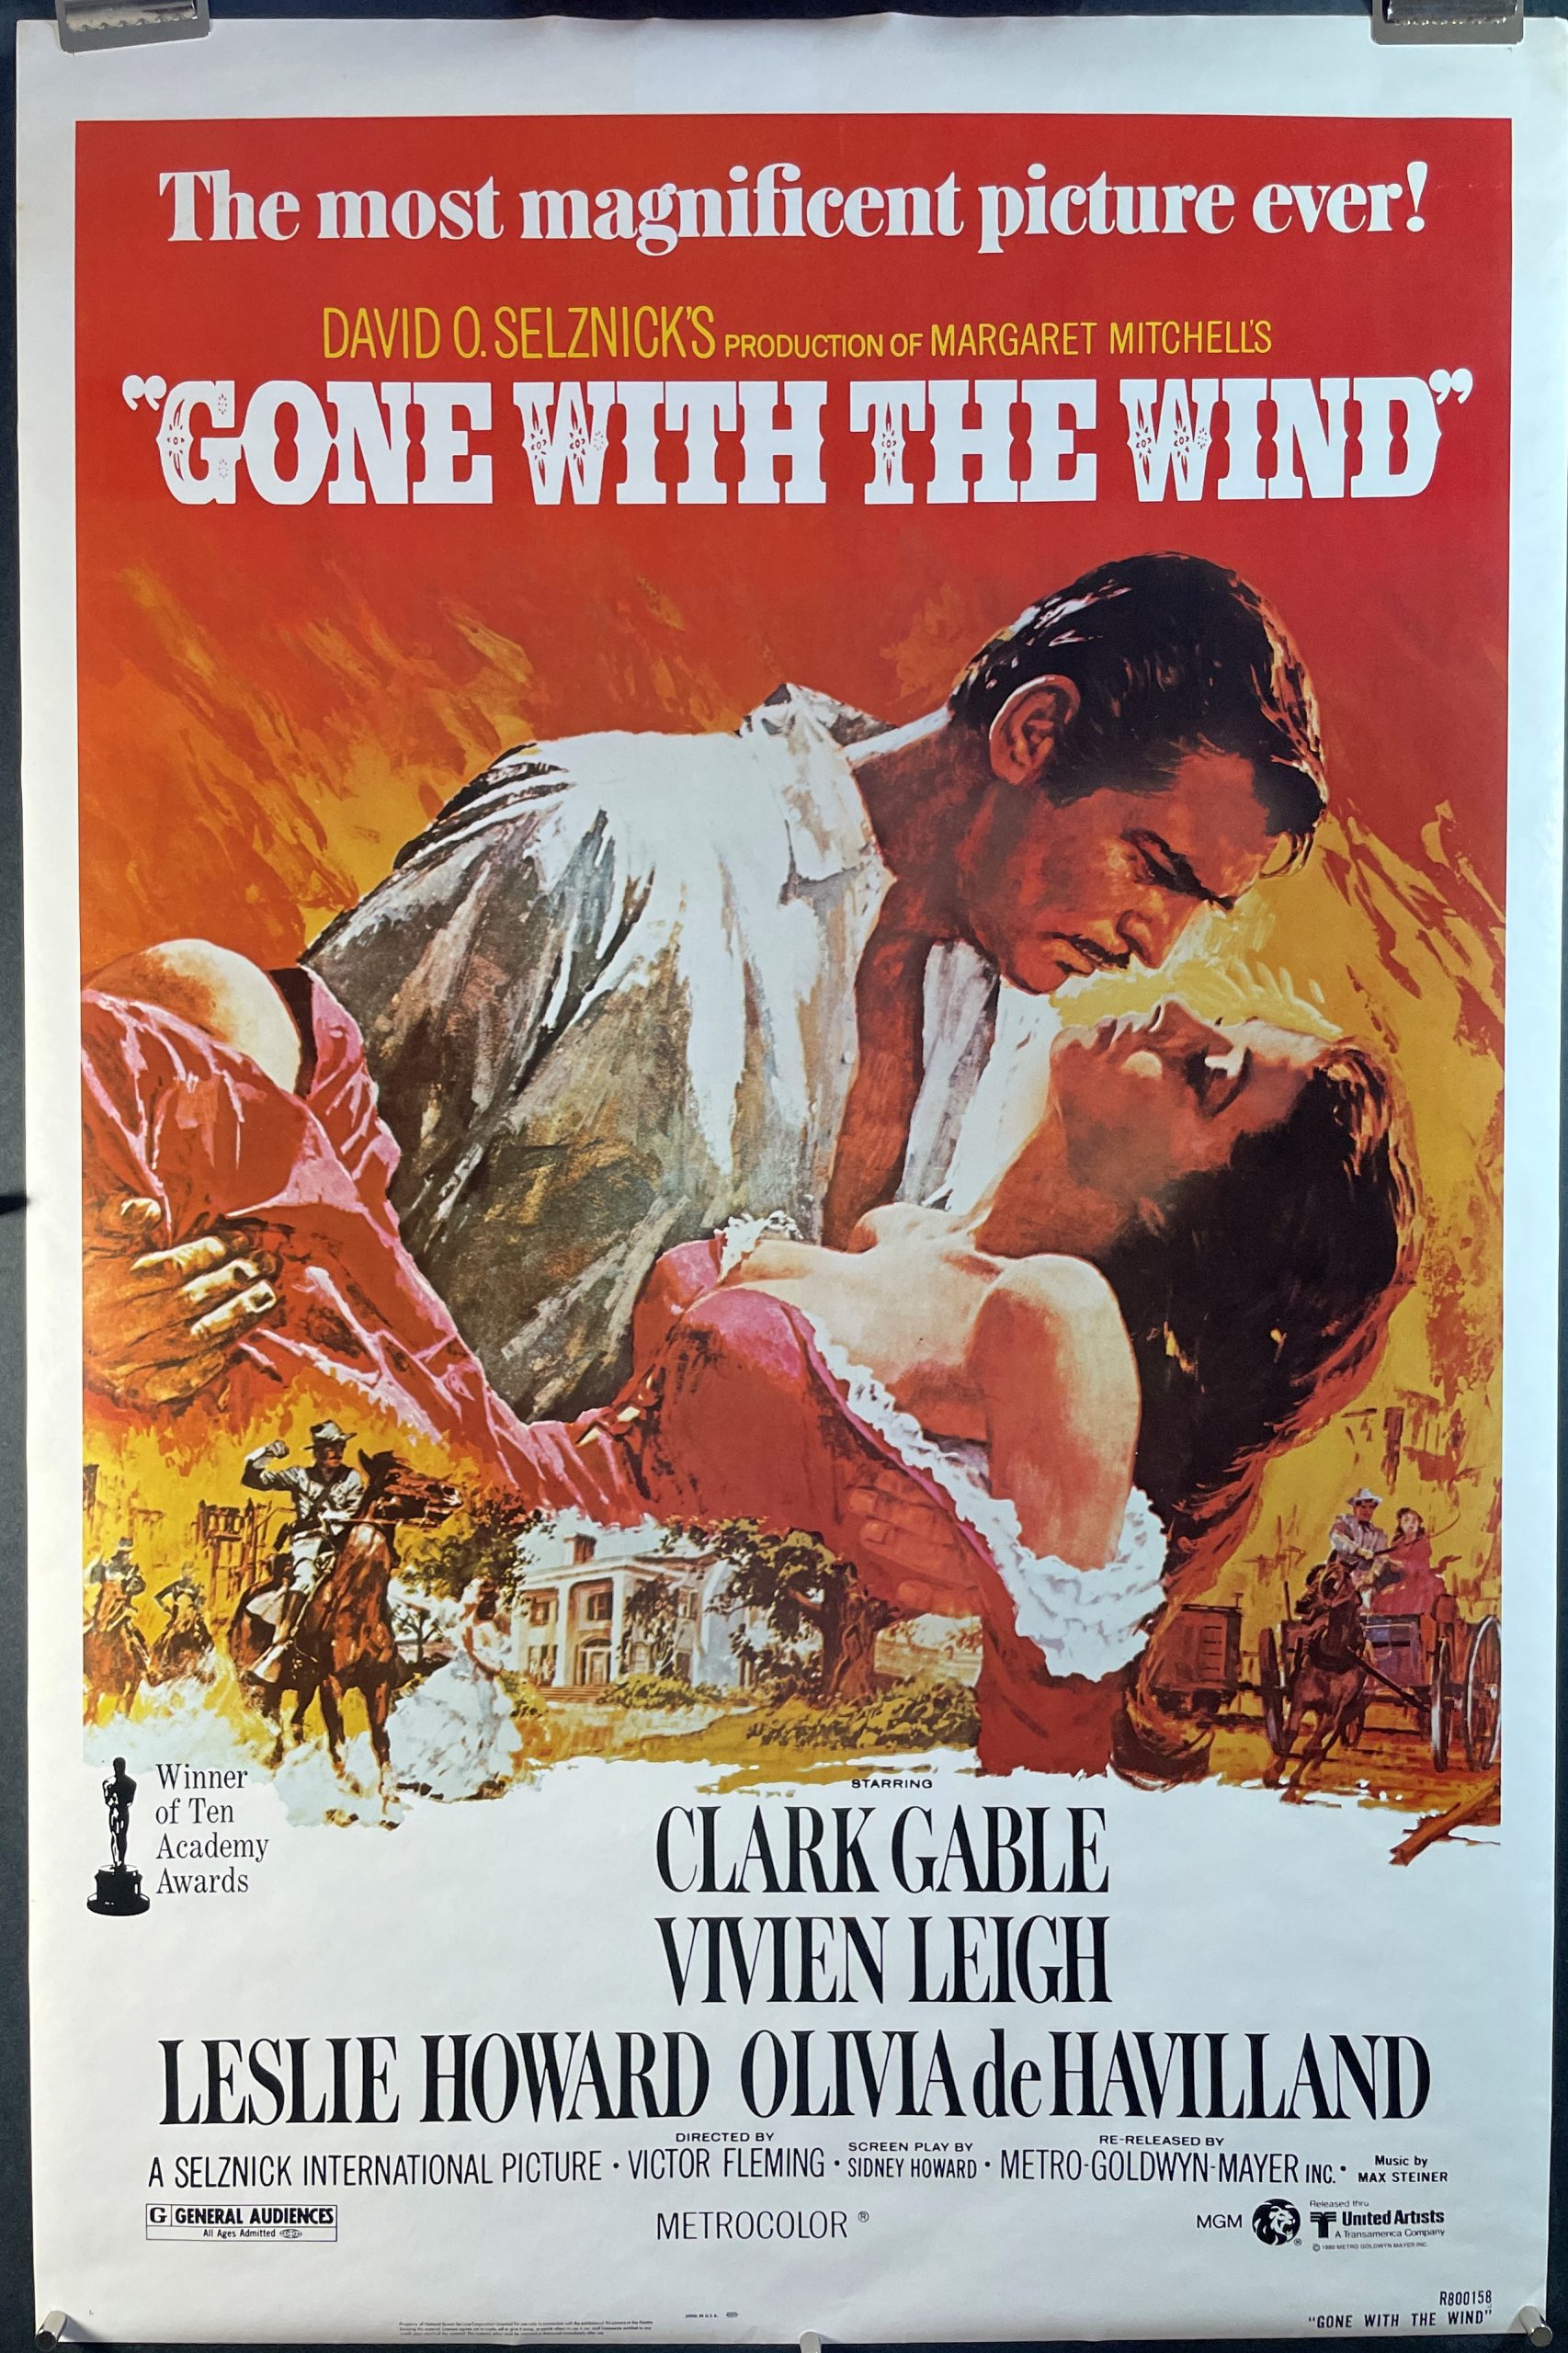 GONE WITH THE WIND, Original Classic Vintage Movie Poster Original